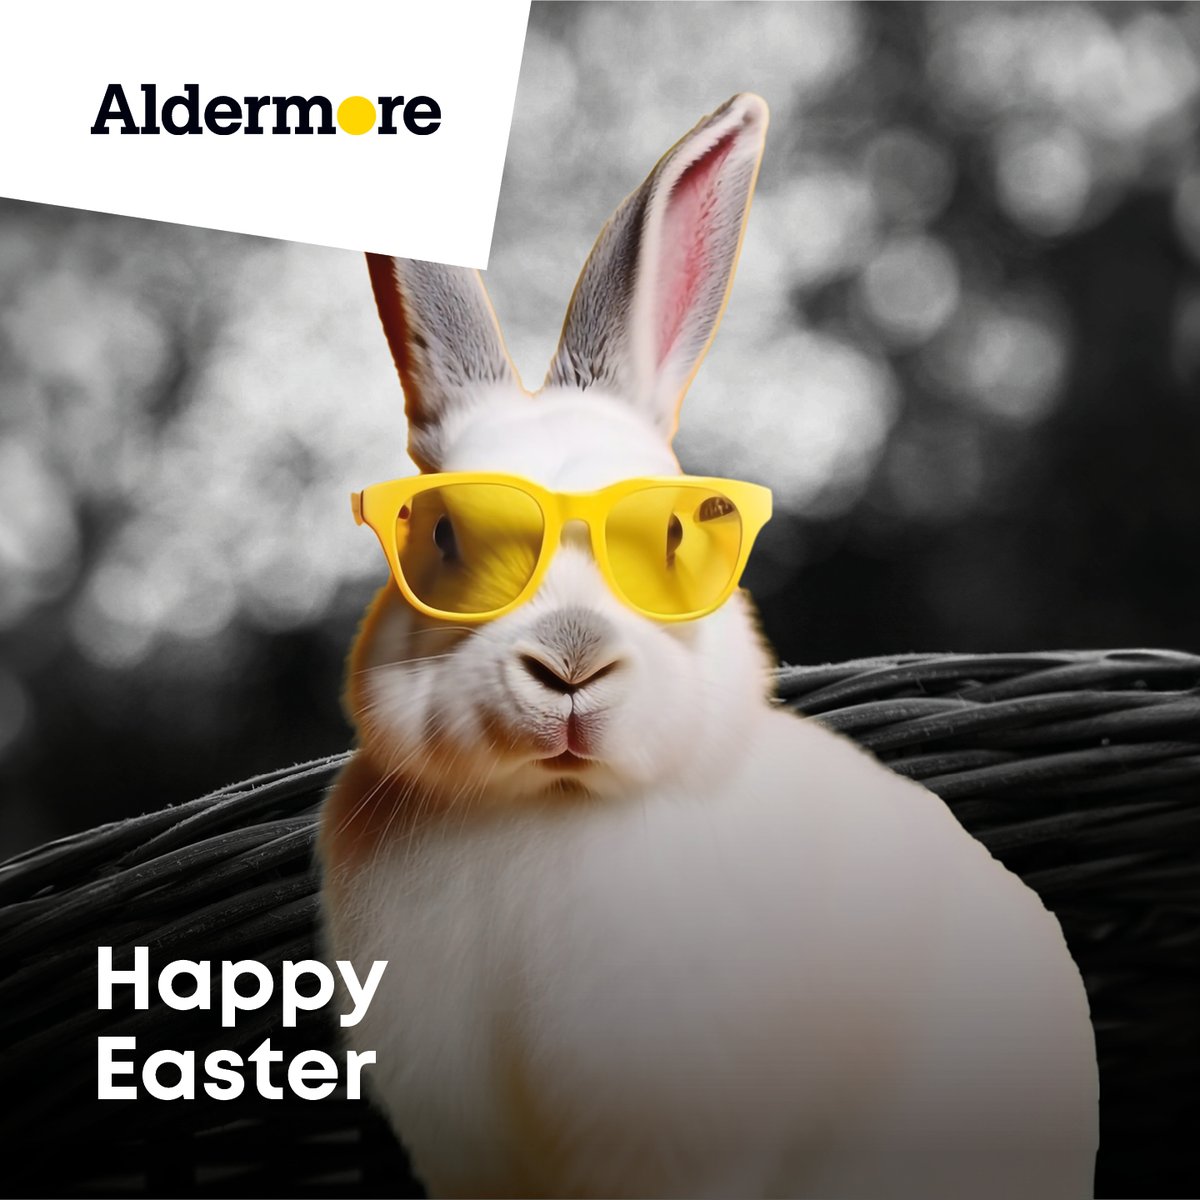 We'd like to wish all our colleagues, customers, friends and families celebrating, a very Happy Easter!